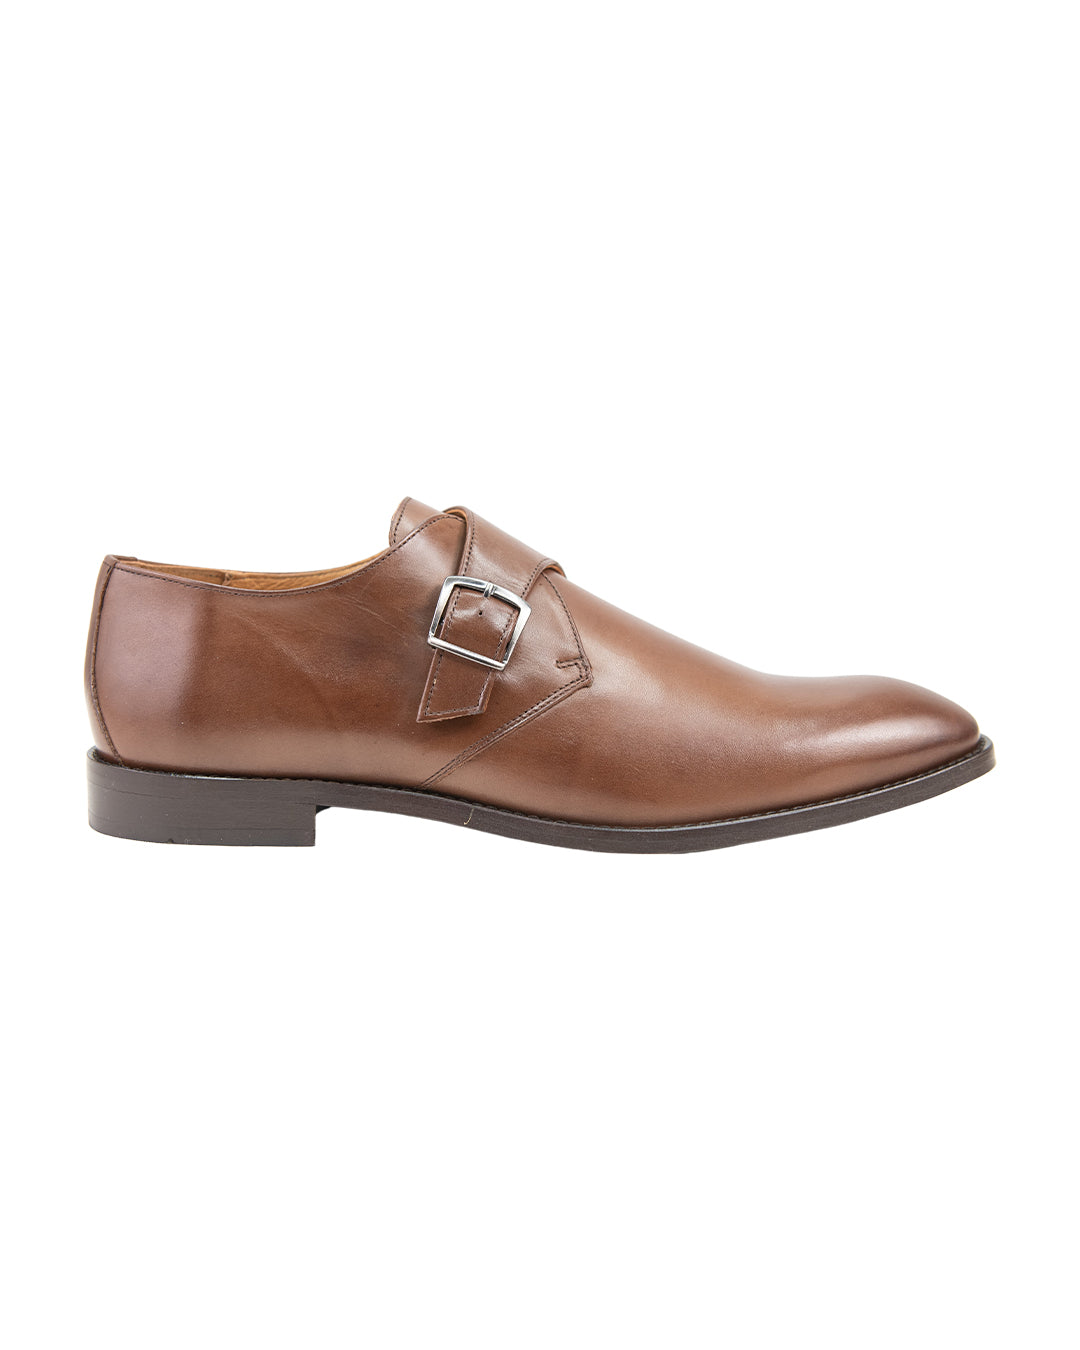 Brown Leather Single Buckle Monk Strap Shoes